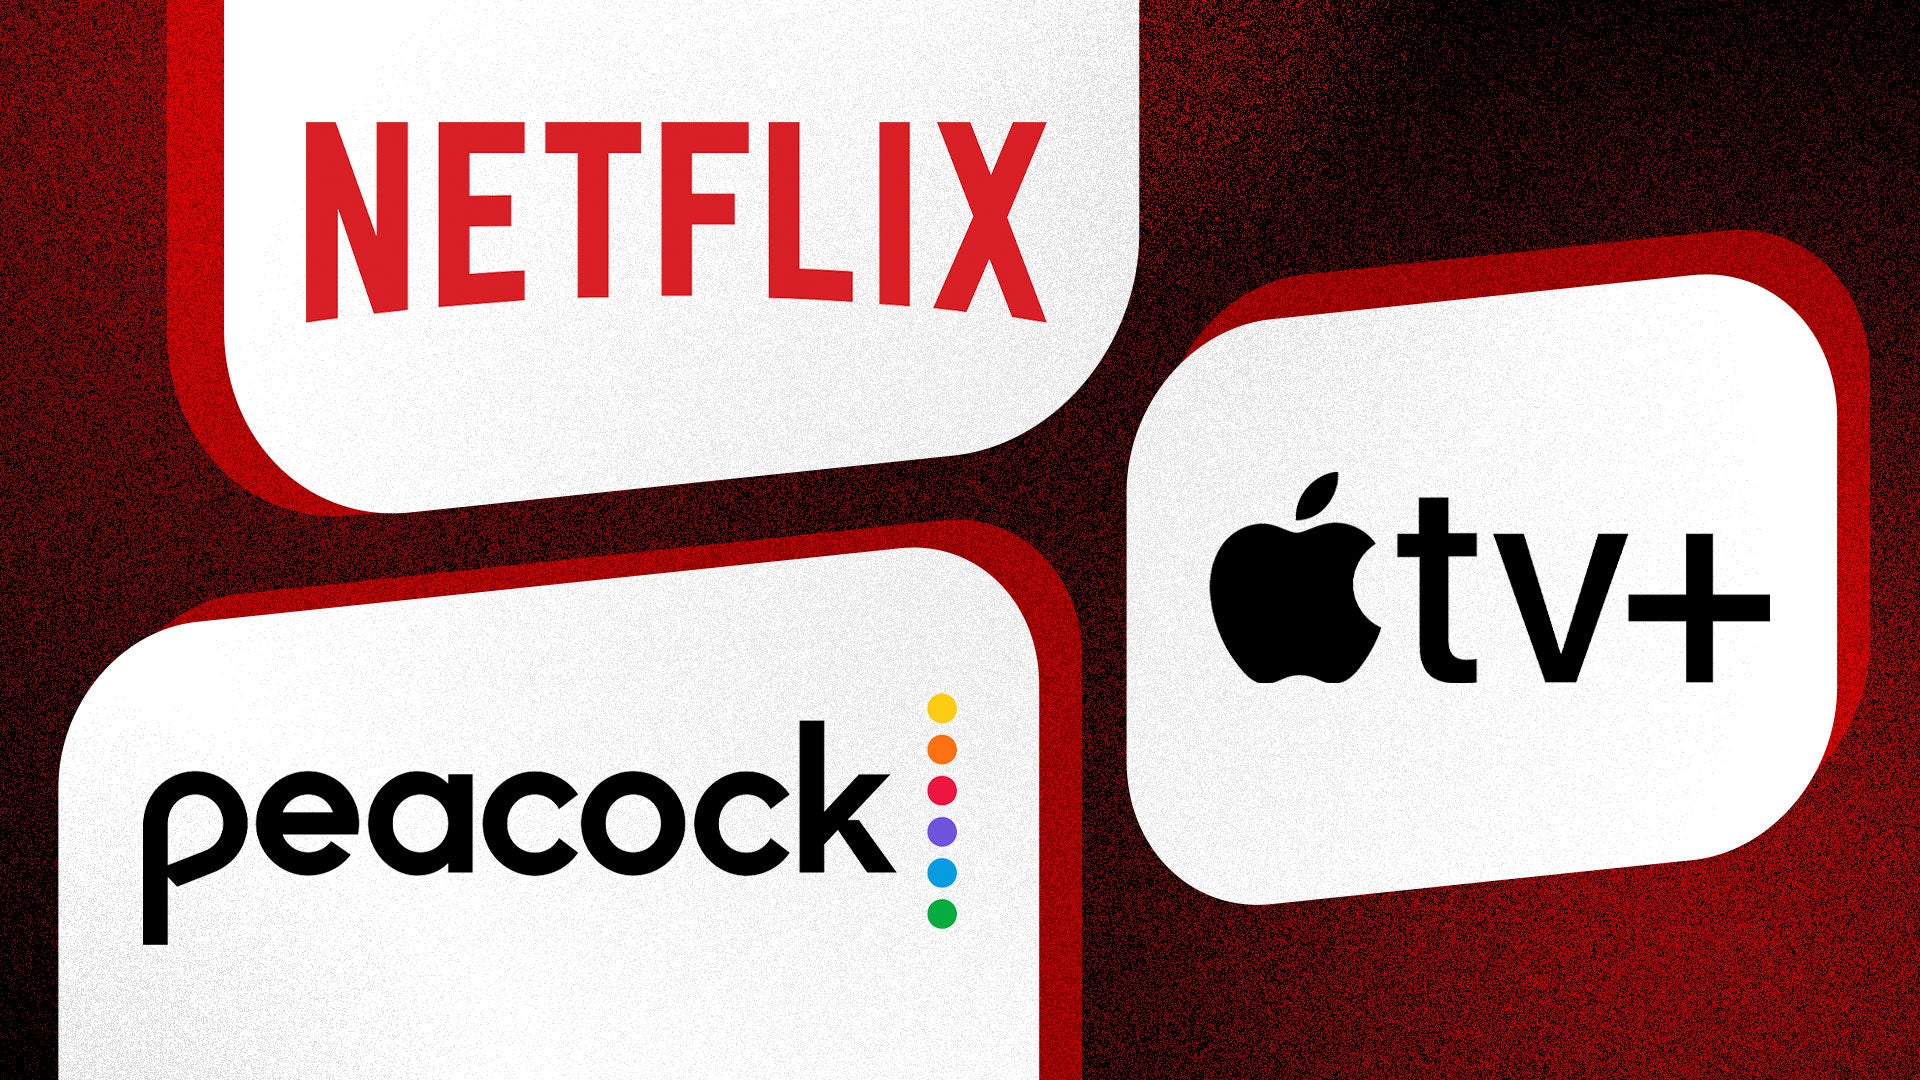 Unlock Streaming Savings: Comcast's New $15 Bundle Includes Netflix, Apple TV+, and Peacock